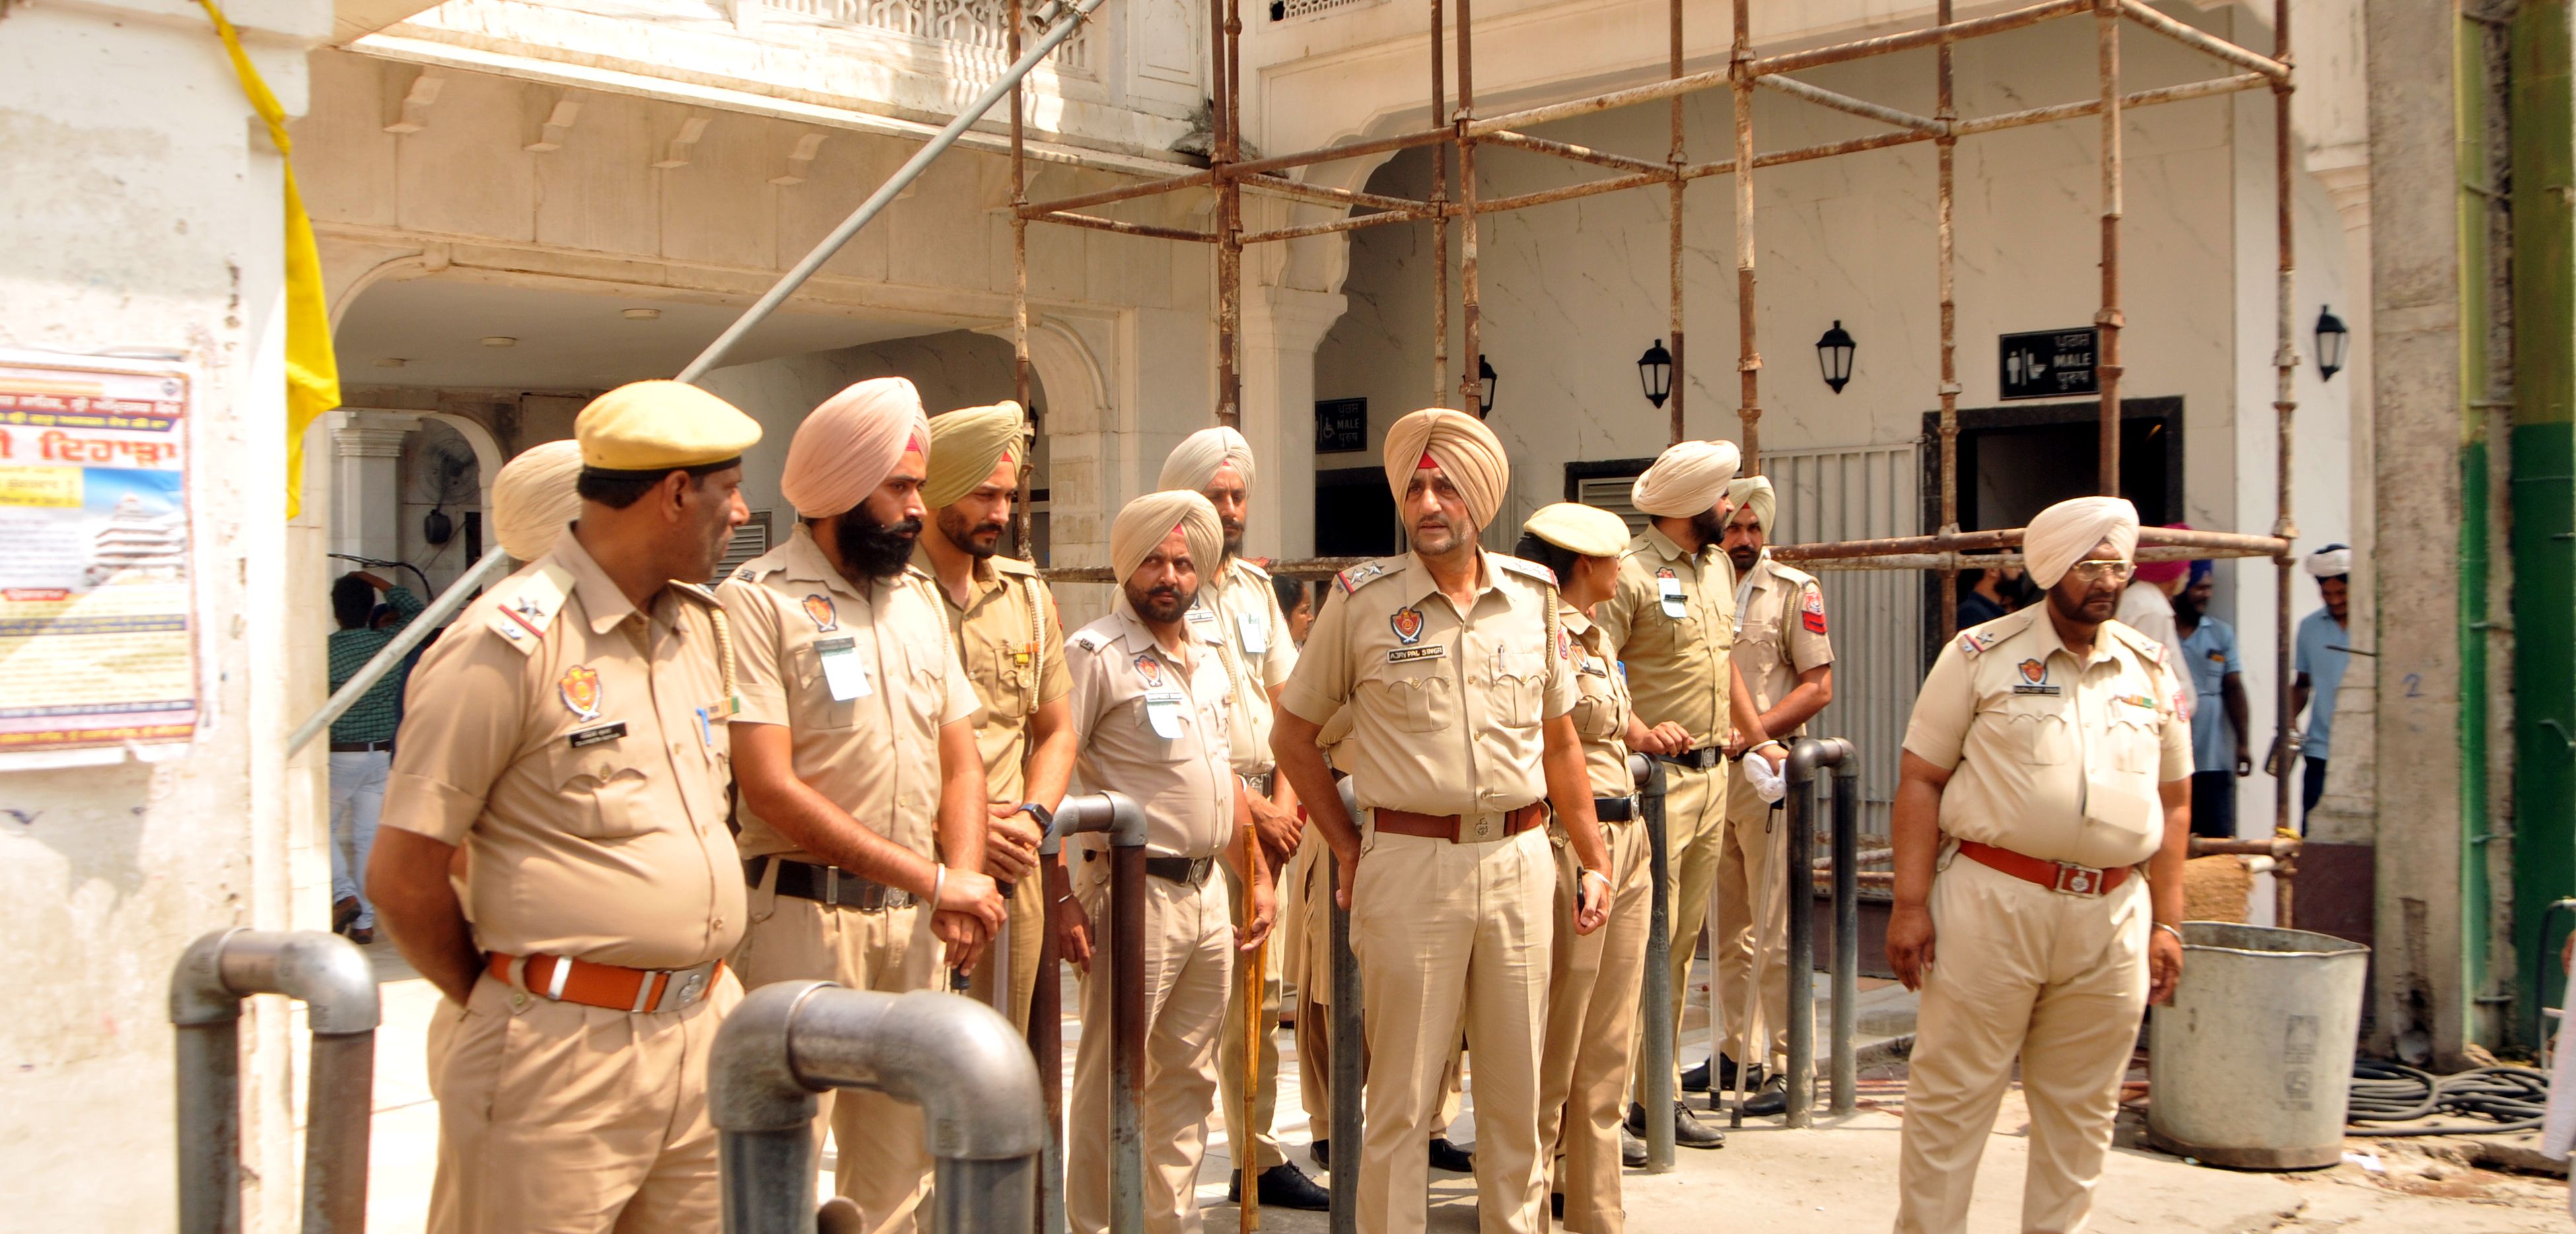 Massive police bandobast ahead of the Operation Bluestar anniversary holds back tourist flow to Amritsar